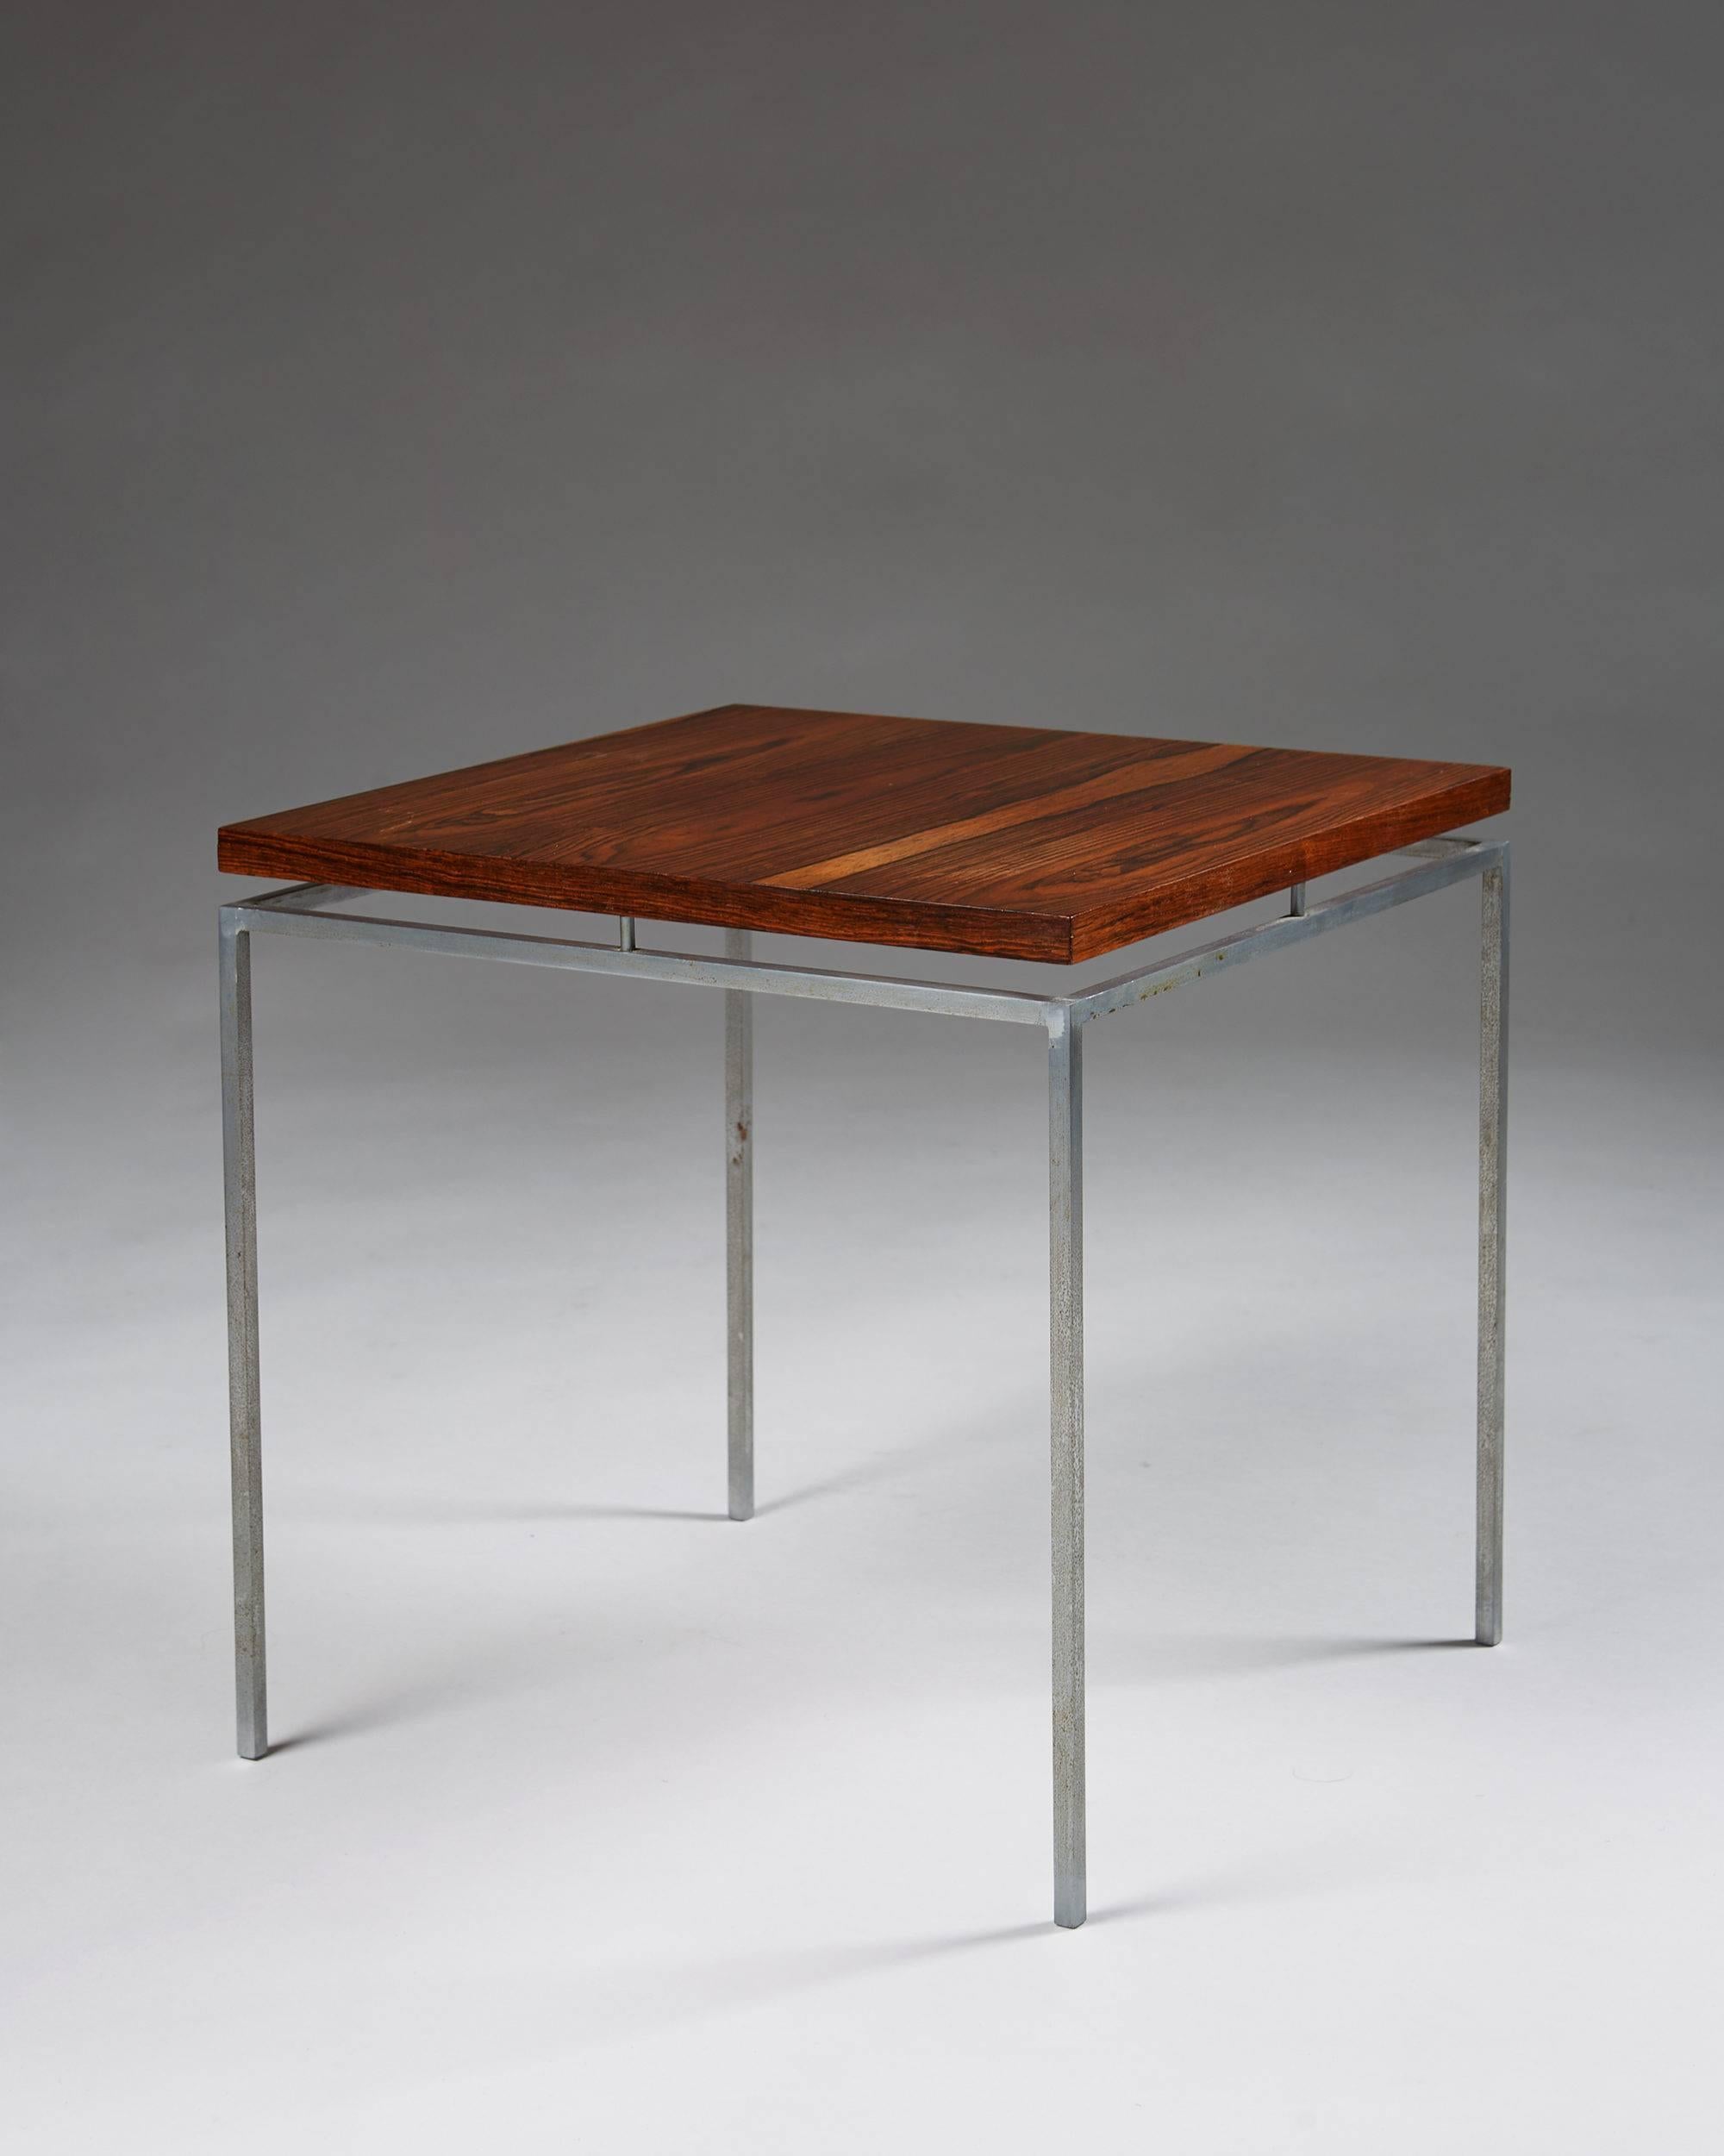 Side table designed by Knud Joos for Jason, Denmark, 1960. Steel and rosewood.

Measures: H: 40 cm/ 15 3/4''
L: 42 cm/ 16 1/2''
D: 42 cm/ 16 1/2''.